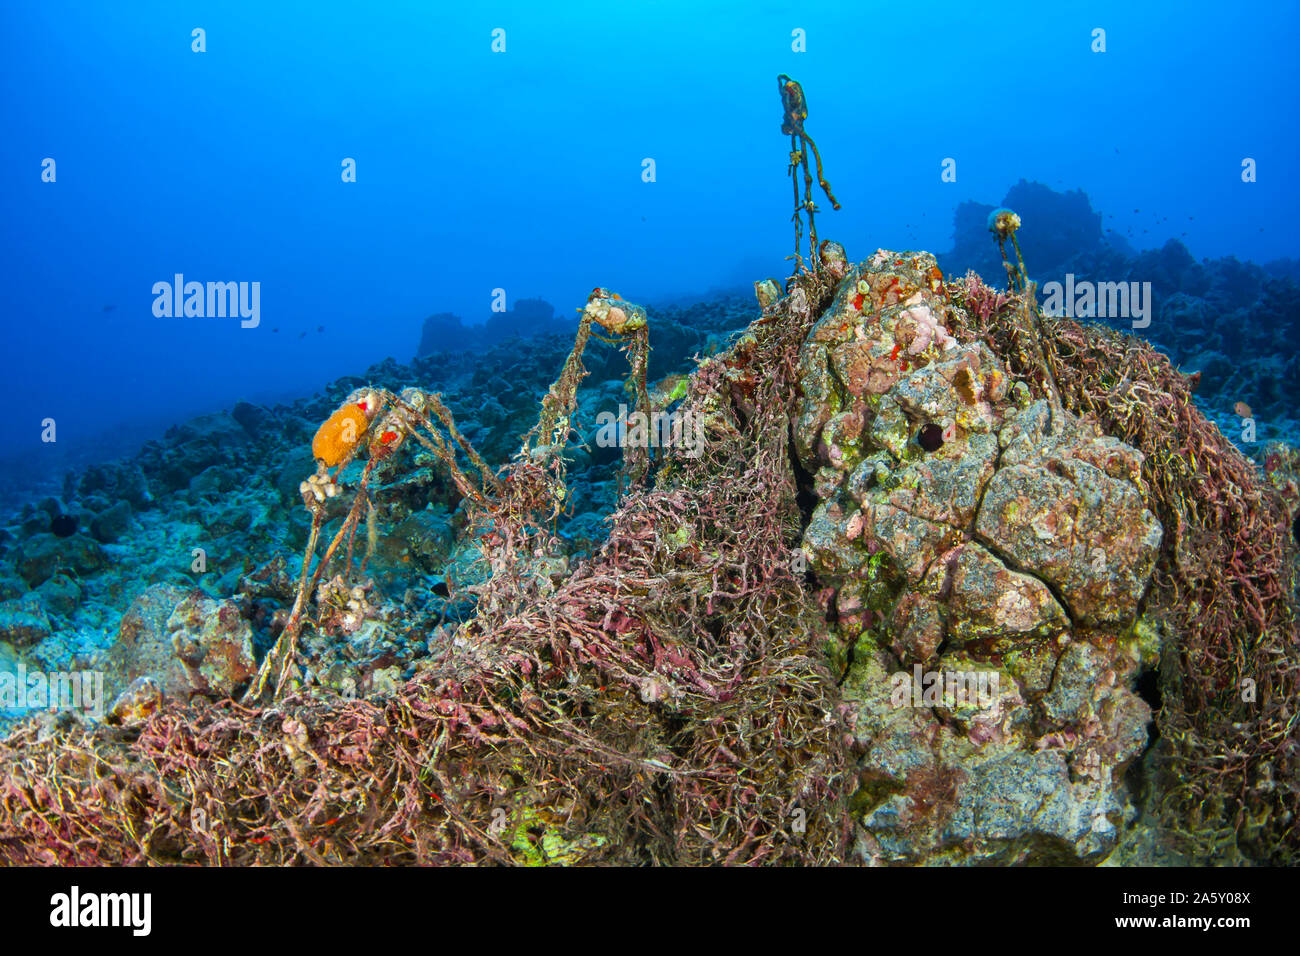 A discarded net has found its way to the reef, Hawaii. Nets like this will kill marine creatures that get caught in it, including fish, sharks and sea Stock Photo